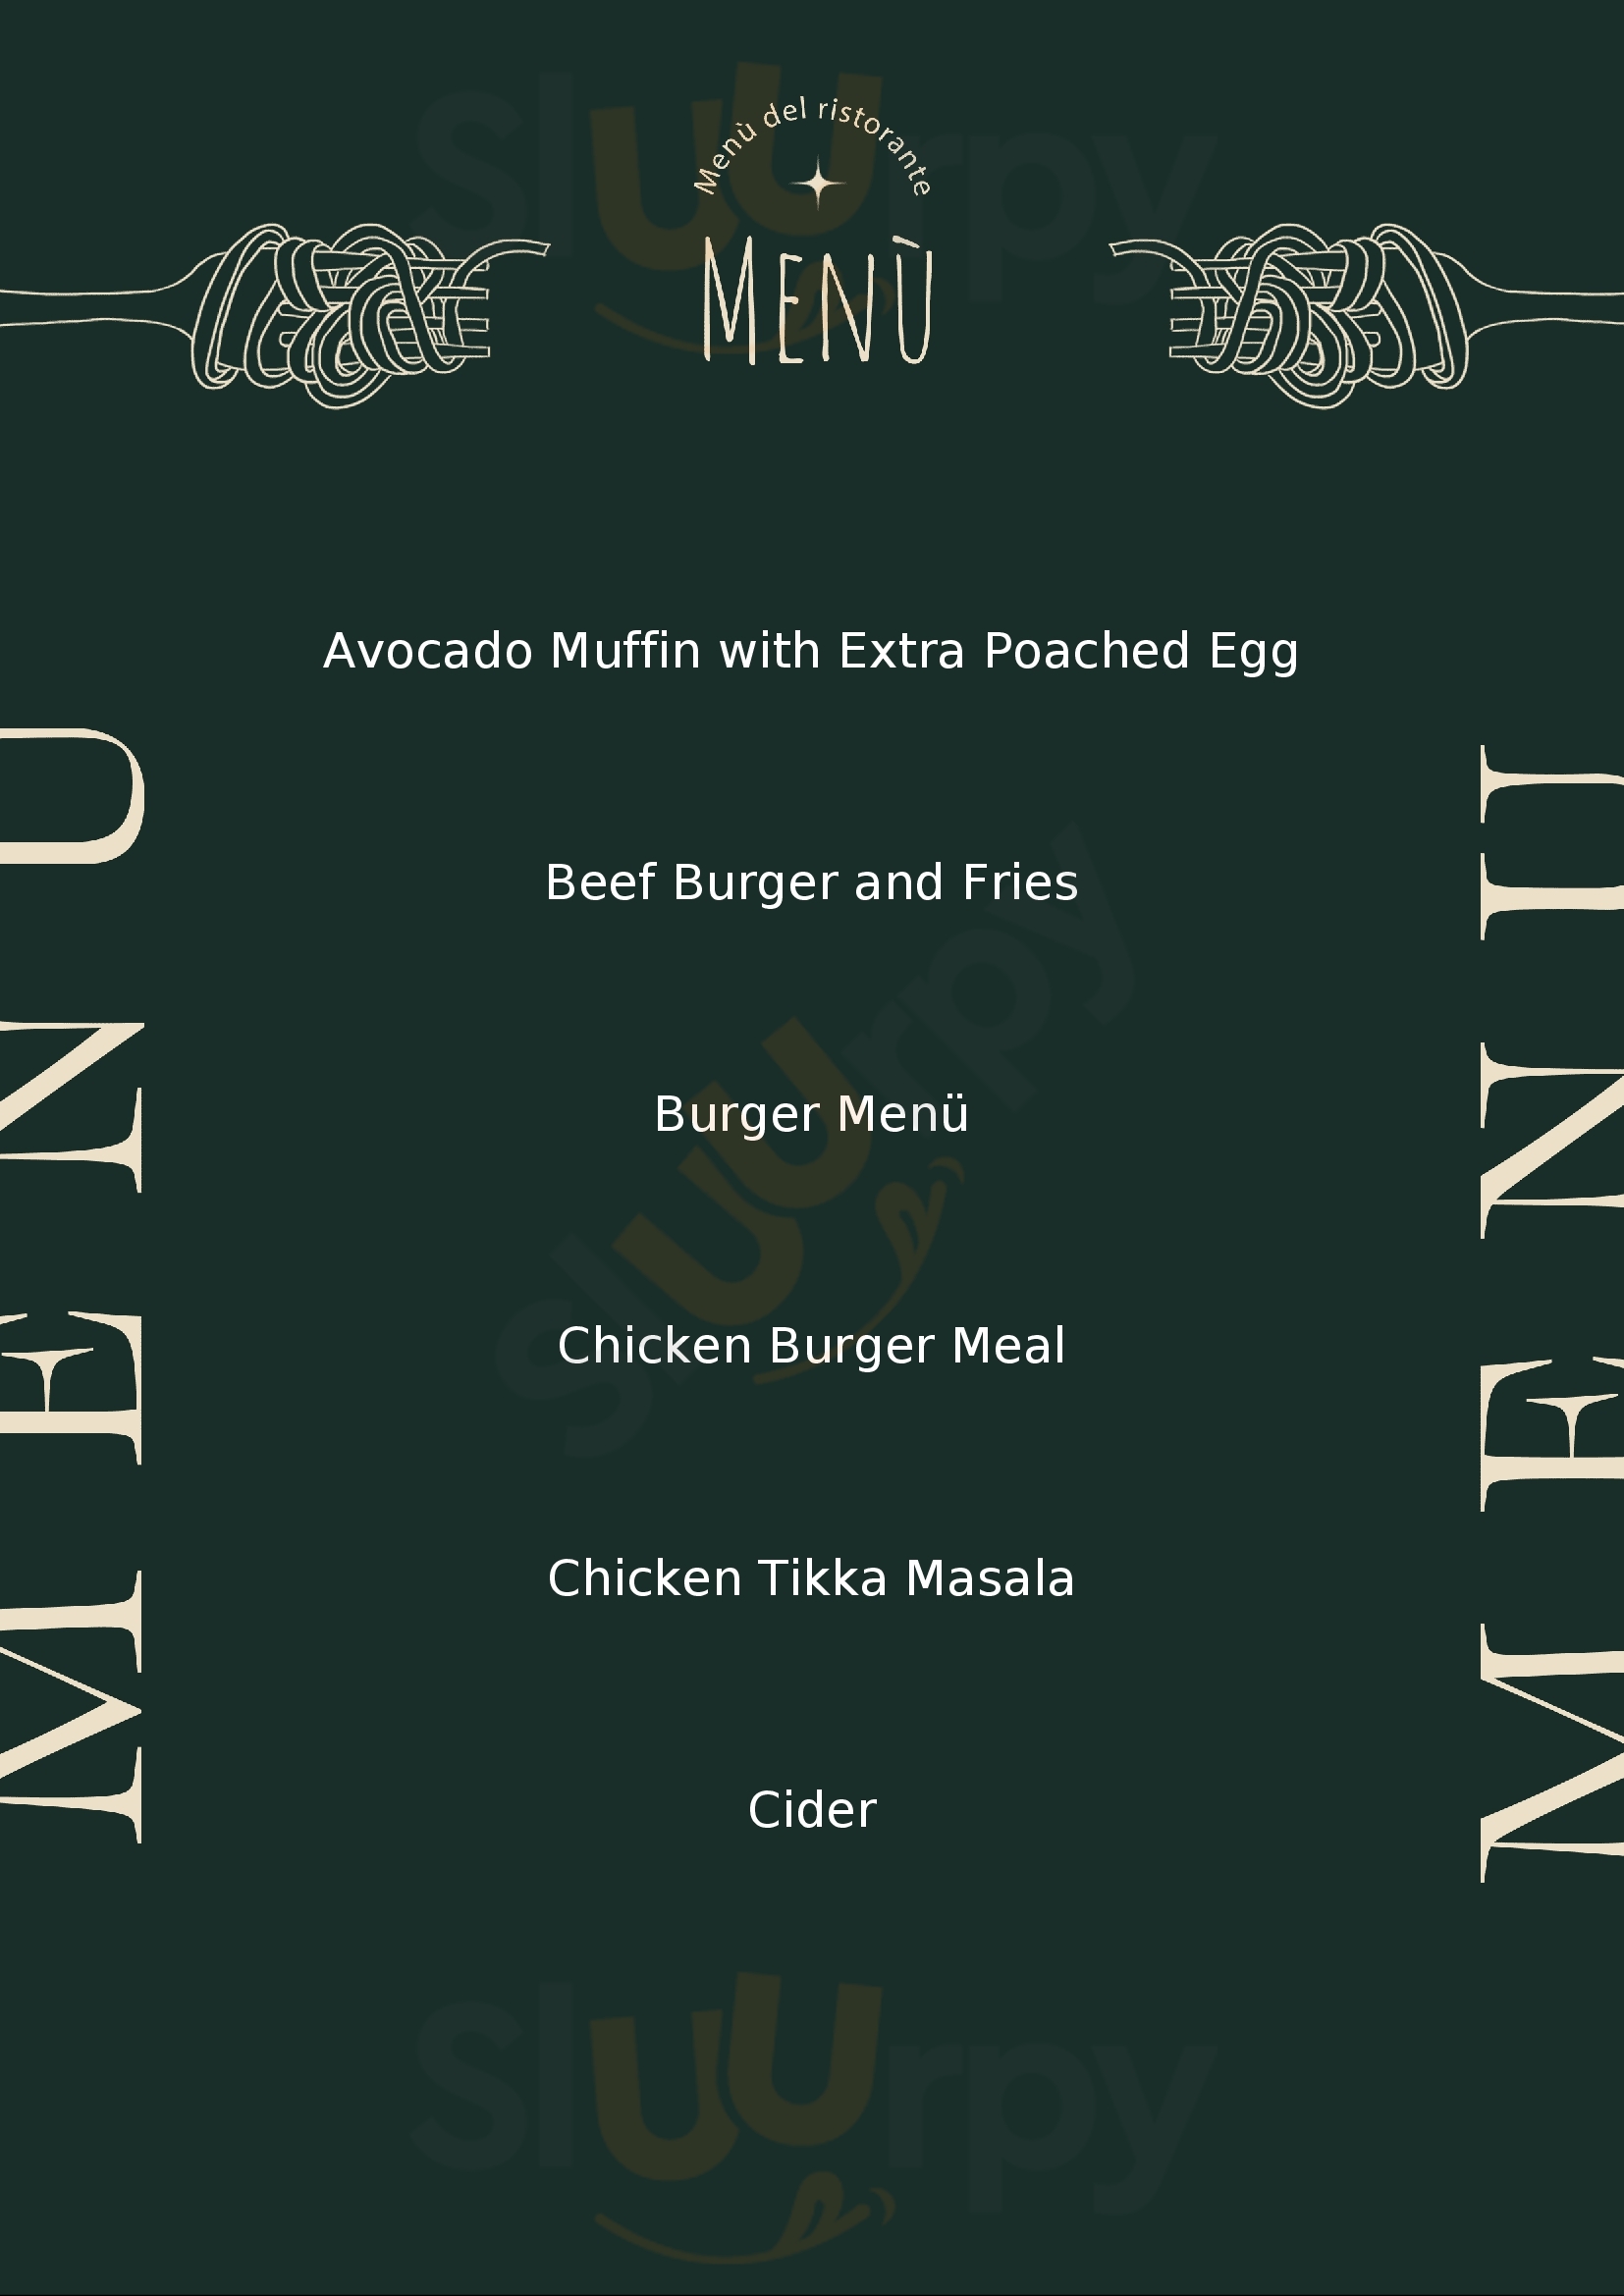 The London And County Eastbourne Menu - 1